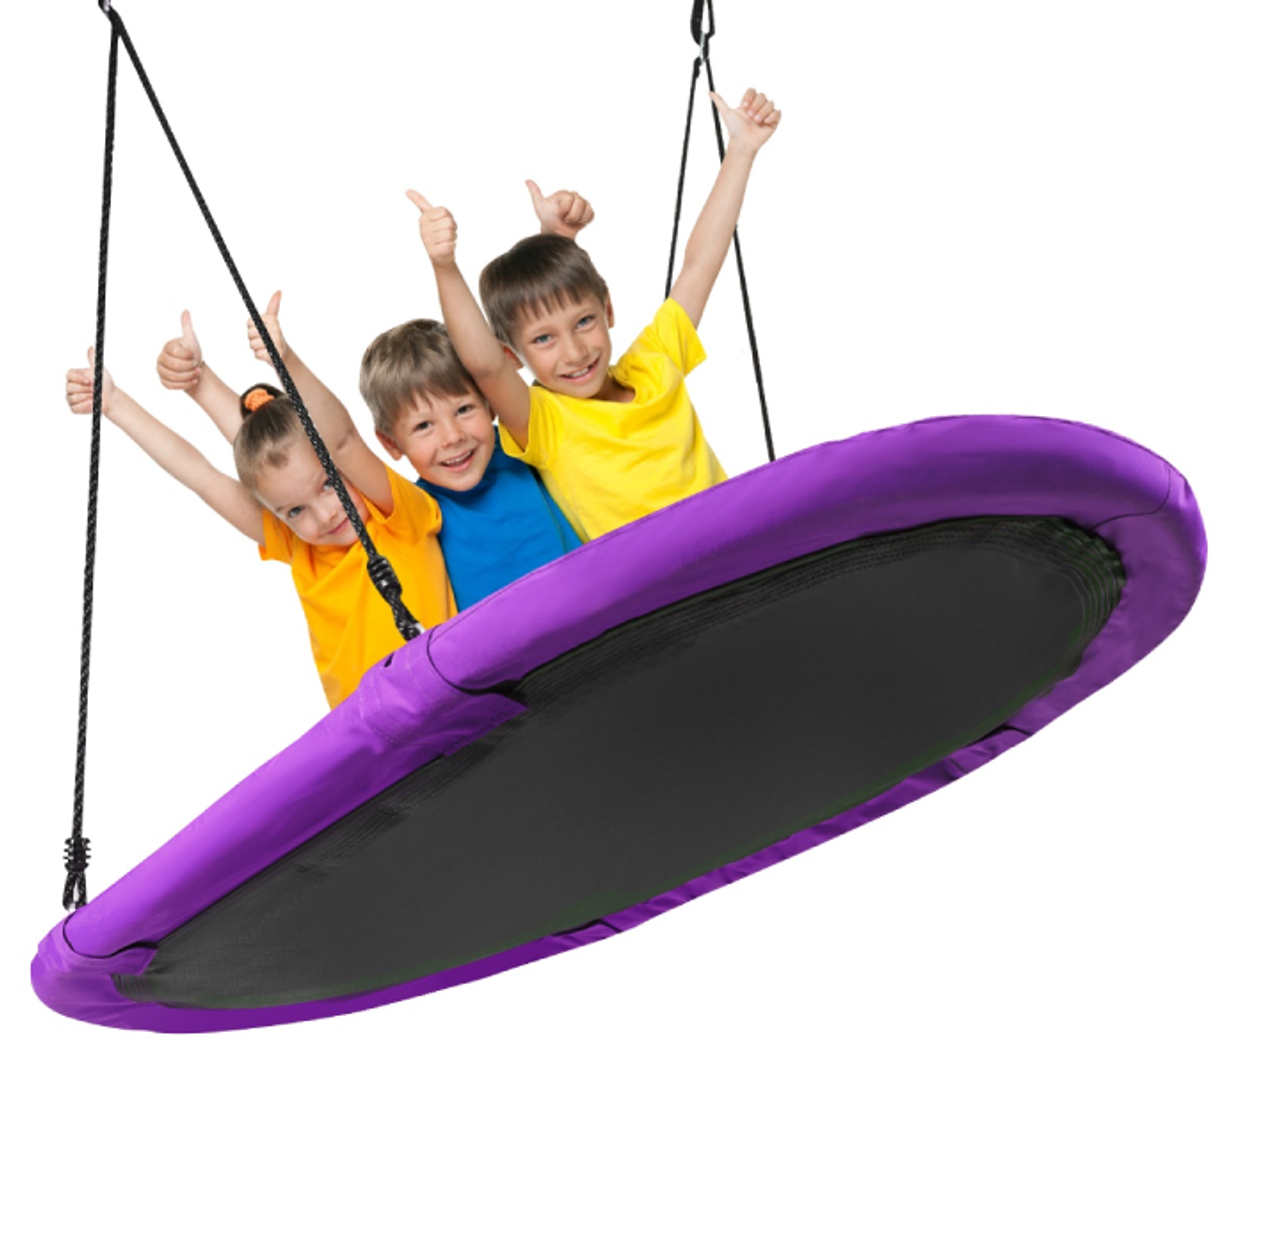 Oval 60-Inch Surfer Saucer Tree Swing - DailySteals